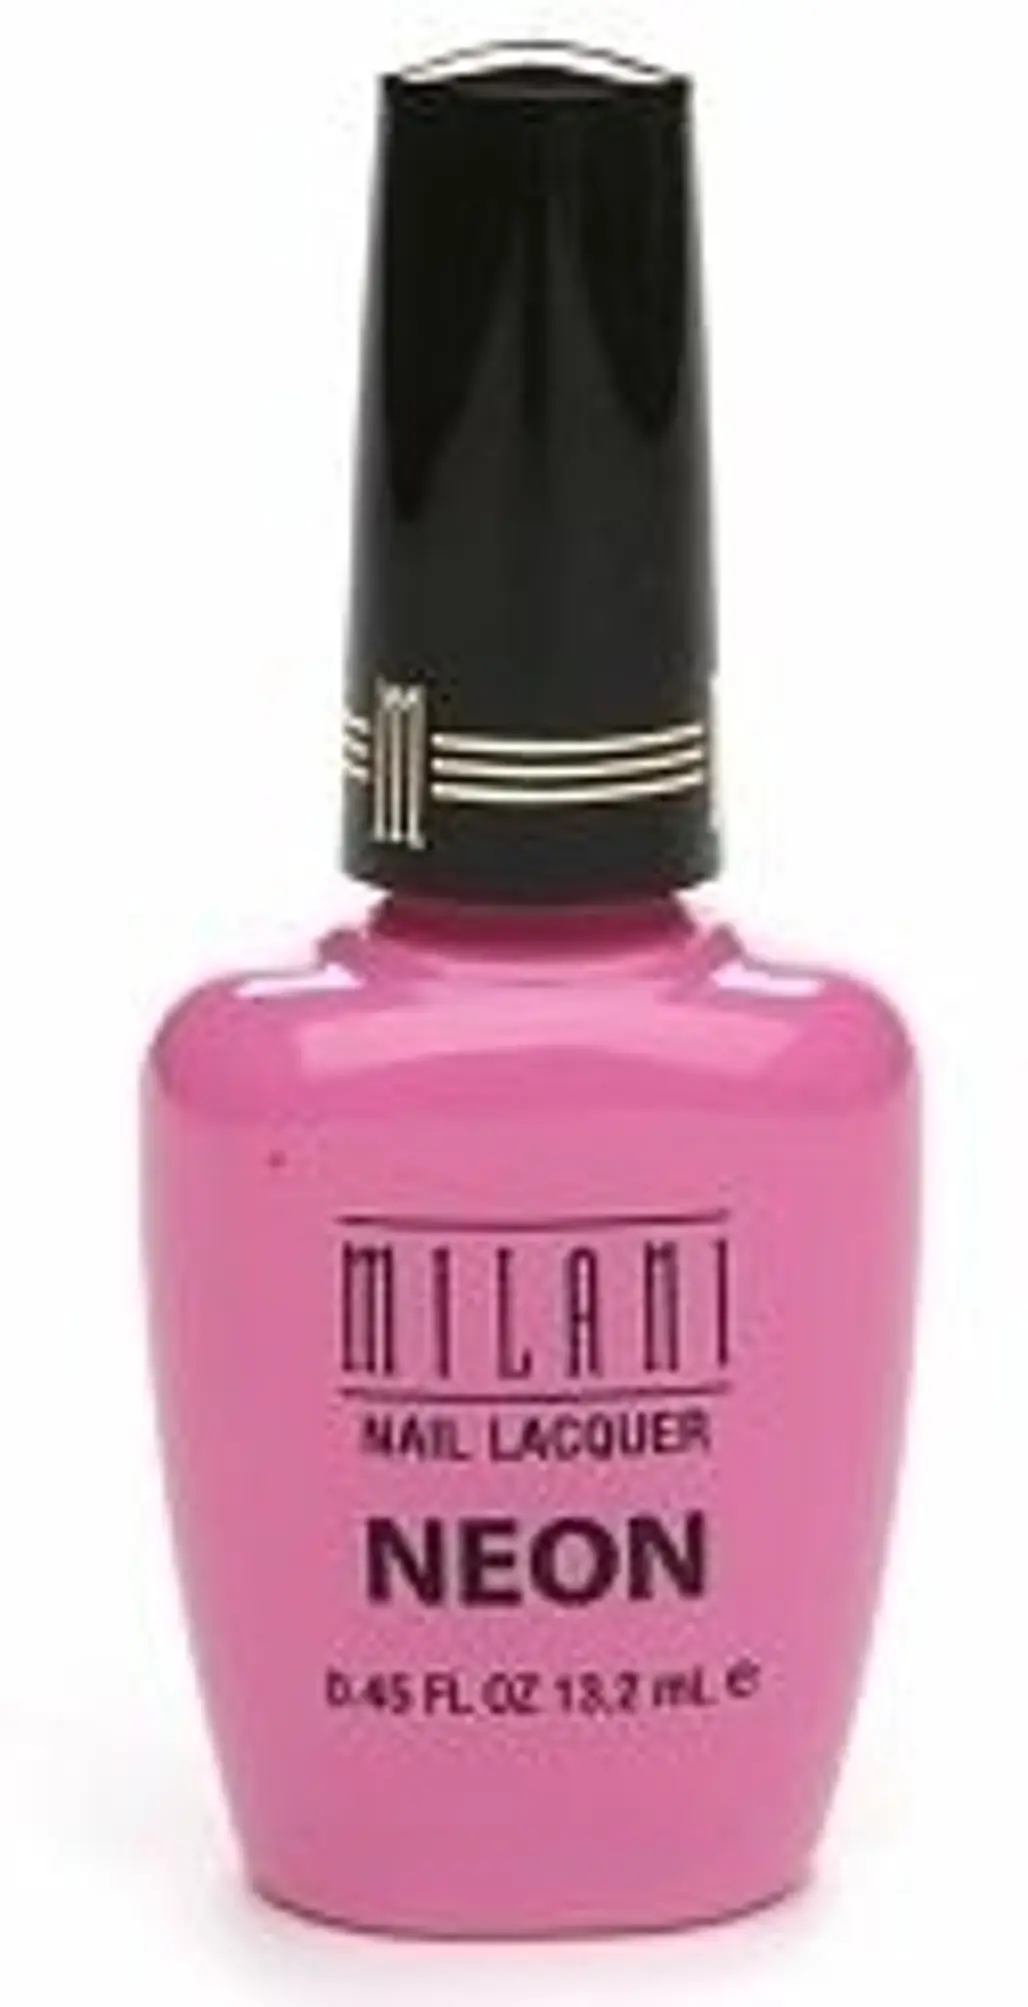 Milani Neon Nail Lacquer in ‘Pink Hottie’